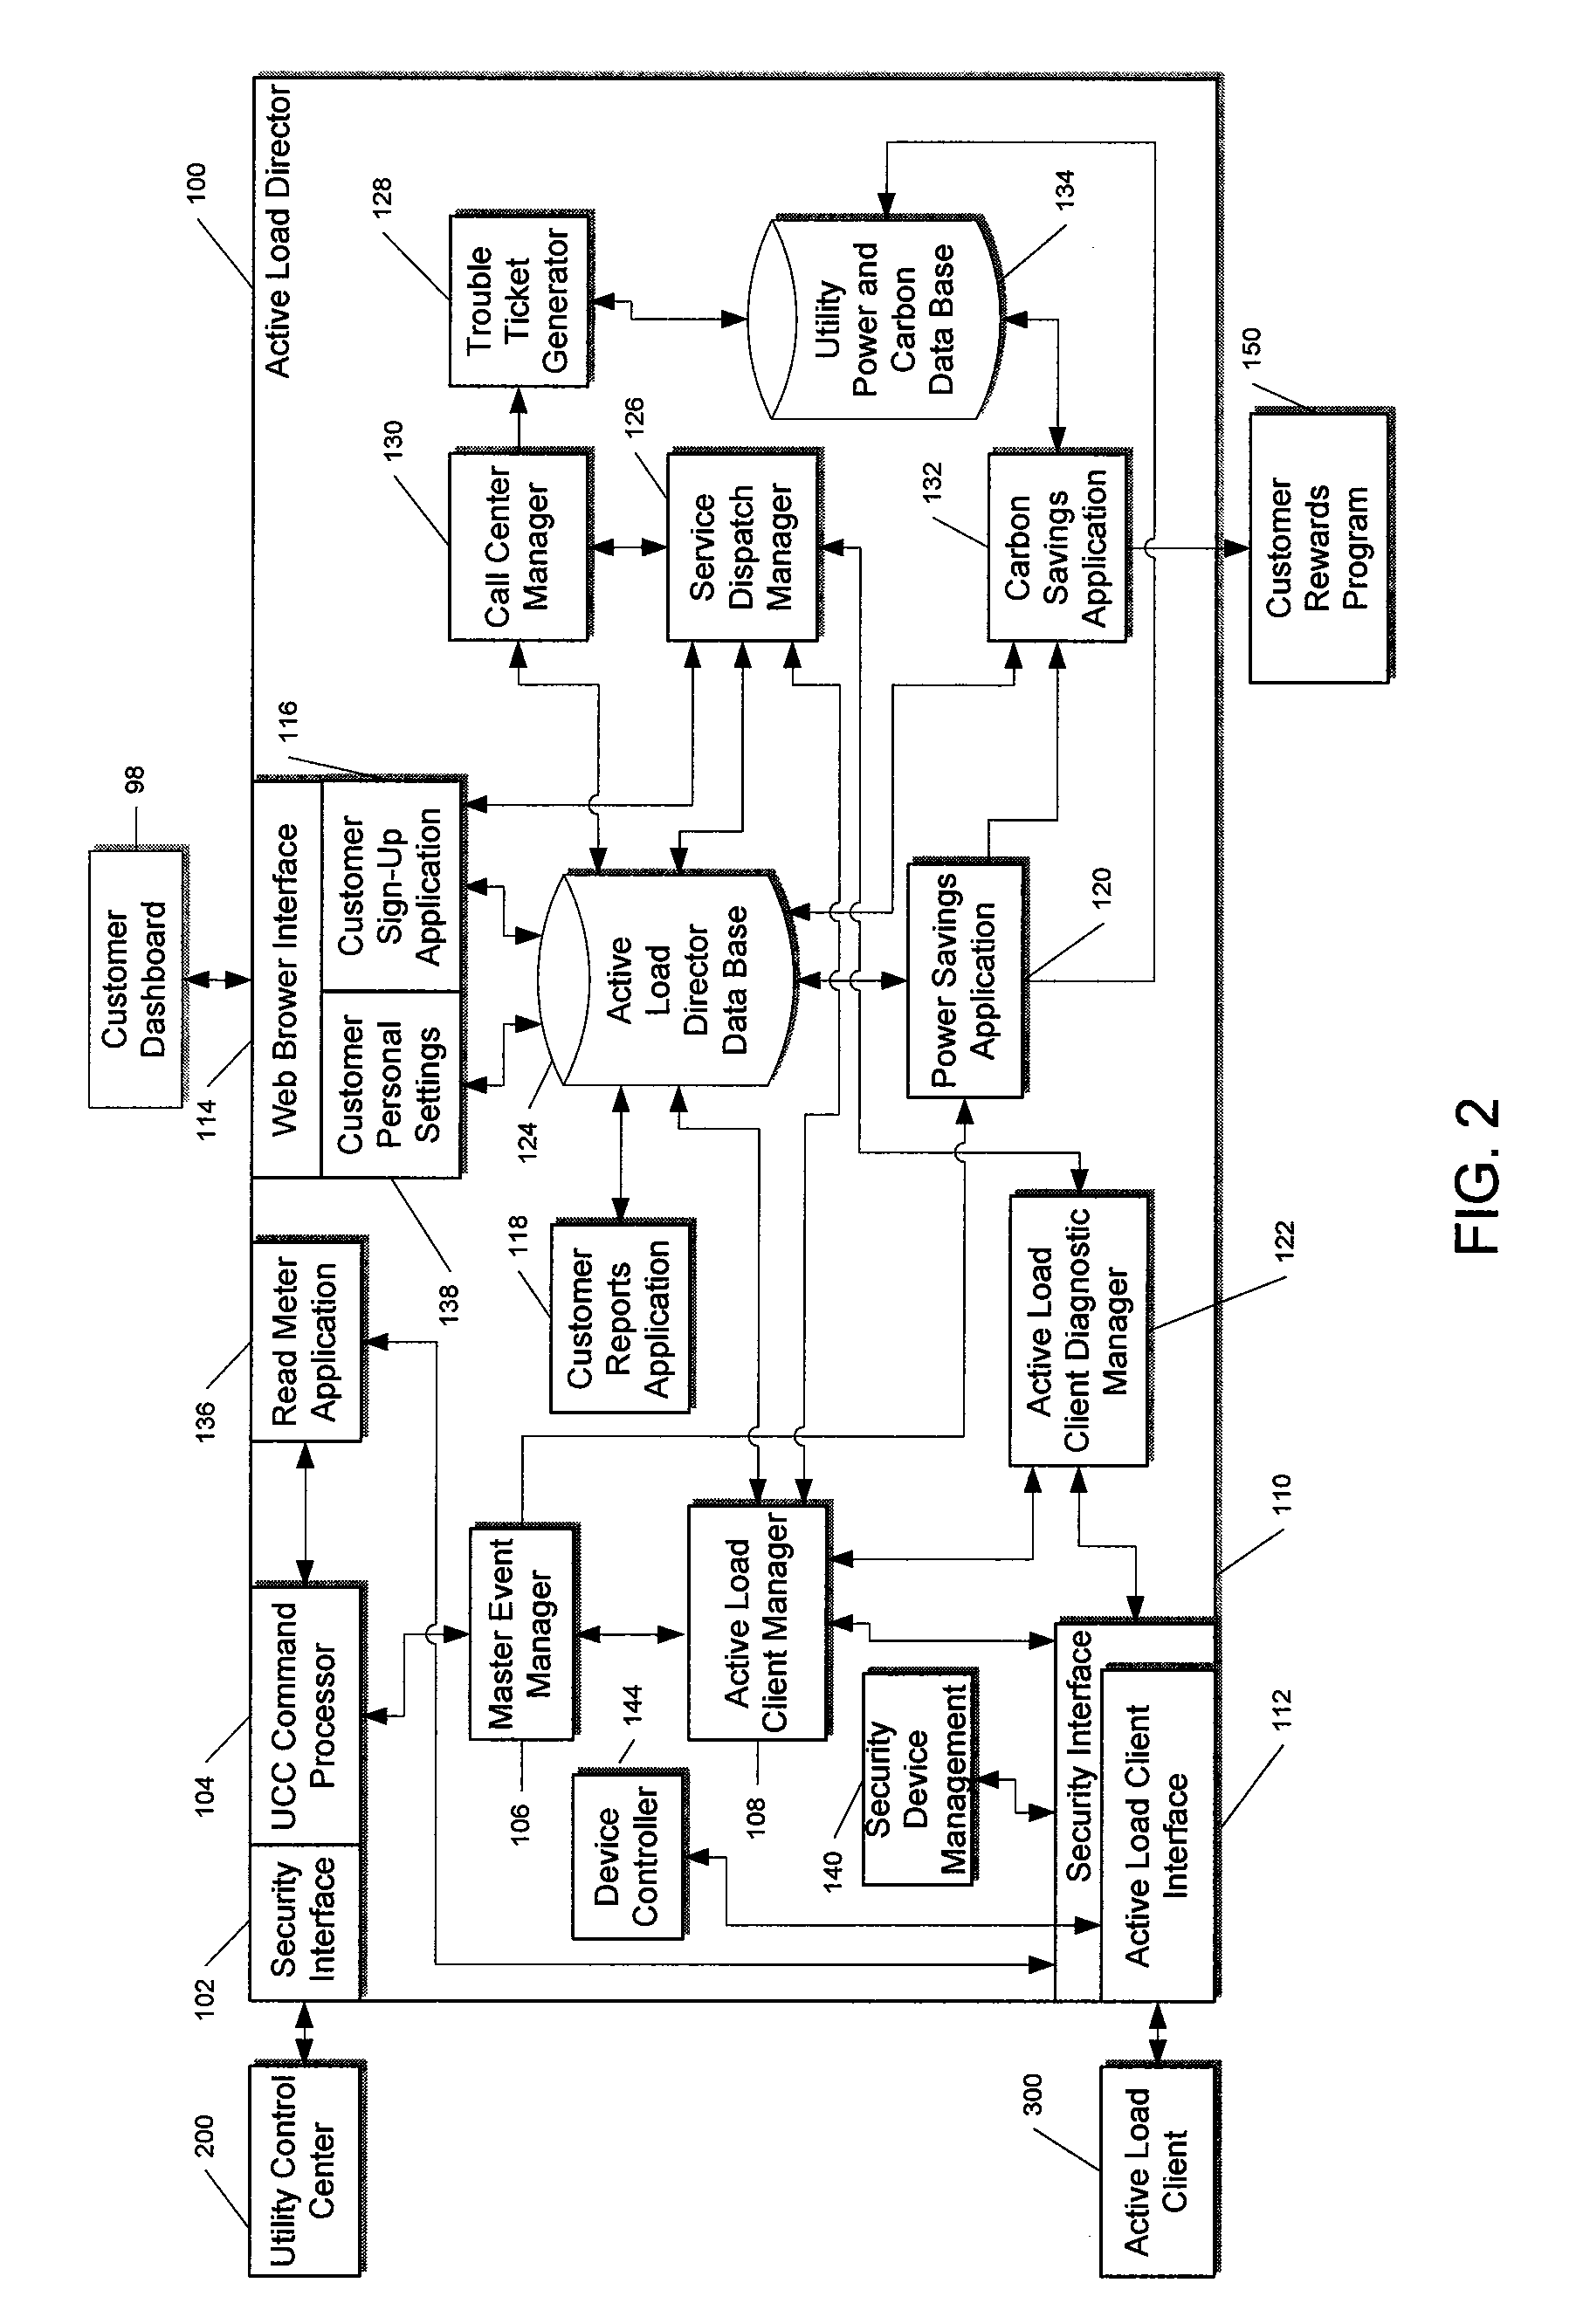 System and method for manipulating controlled energy using devices to manage customer bills